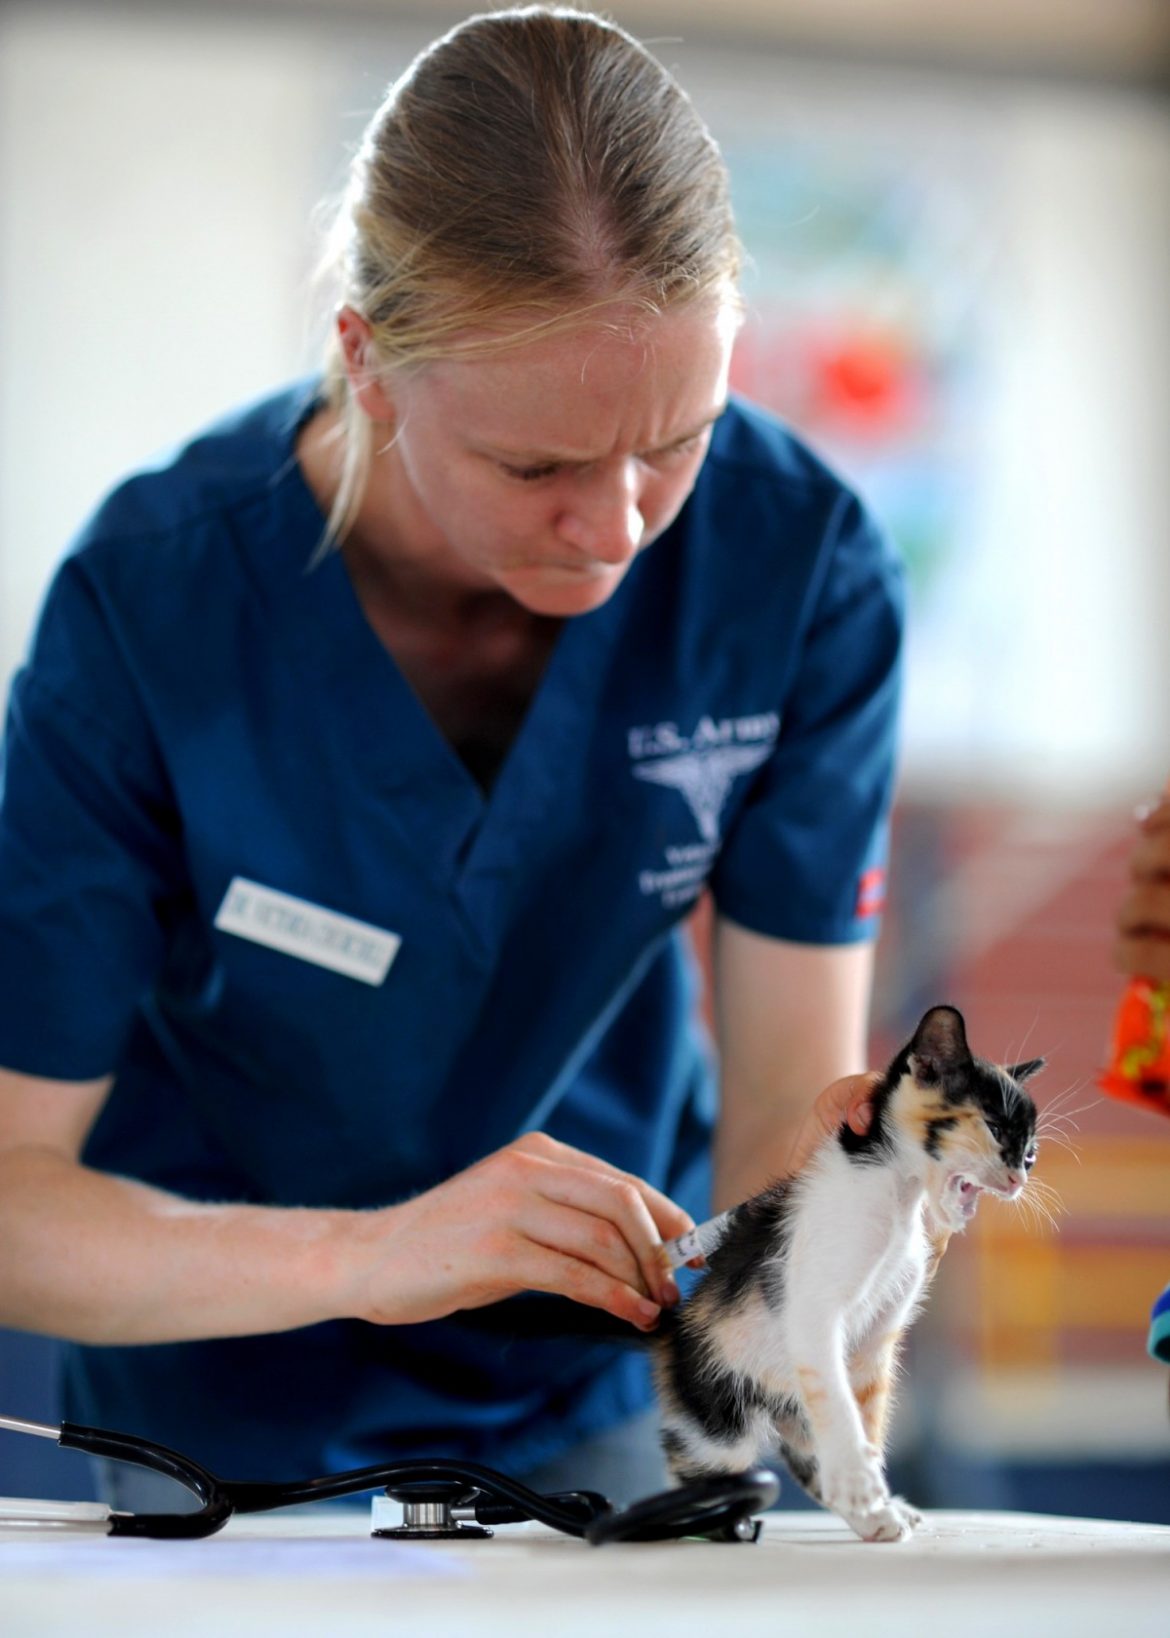 Professional Community Platform Launches With Mission to Make the Veterinary Profession a Better Place to Work